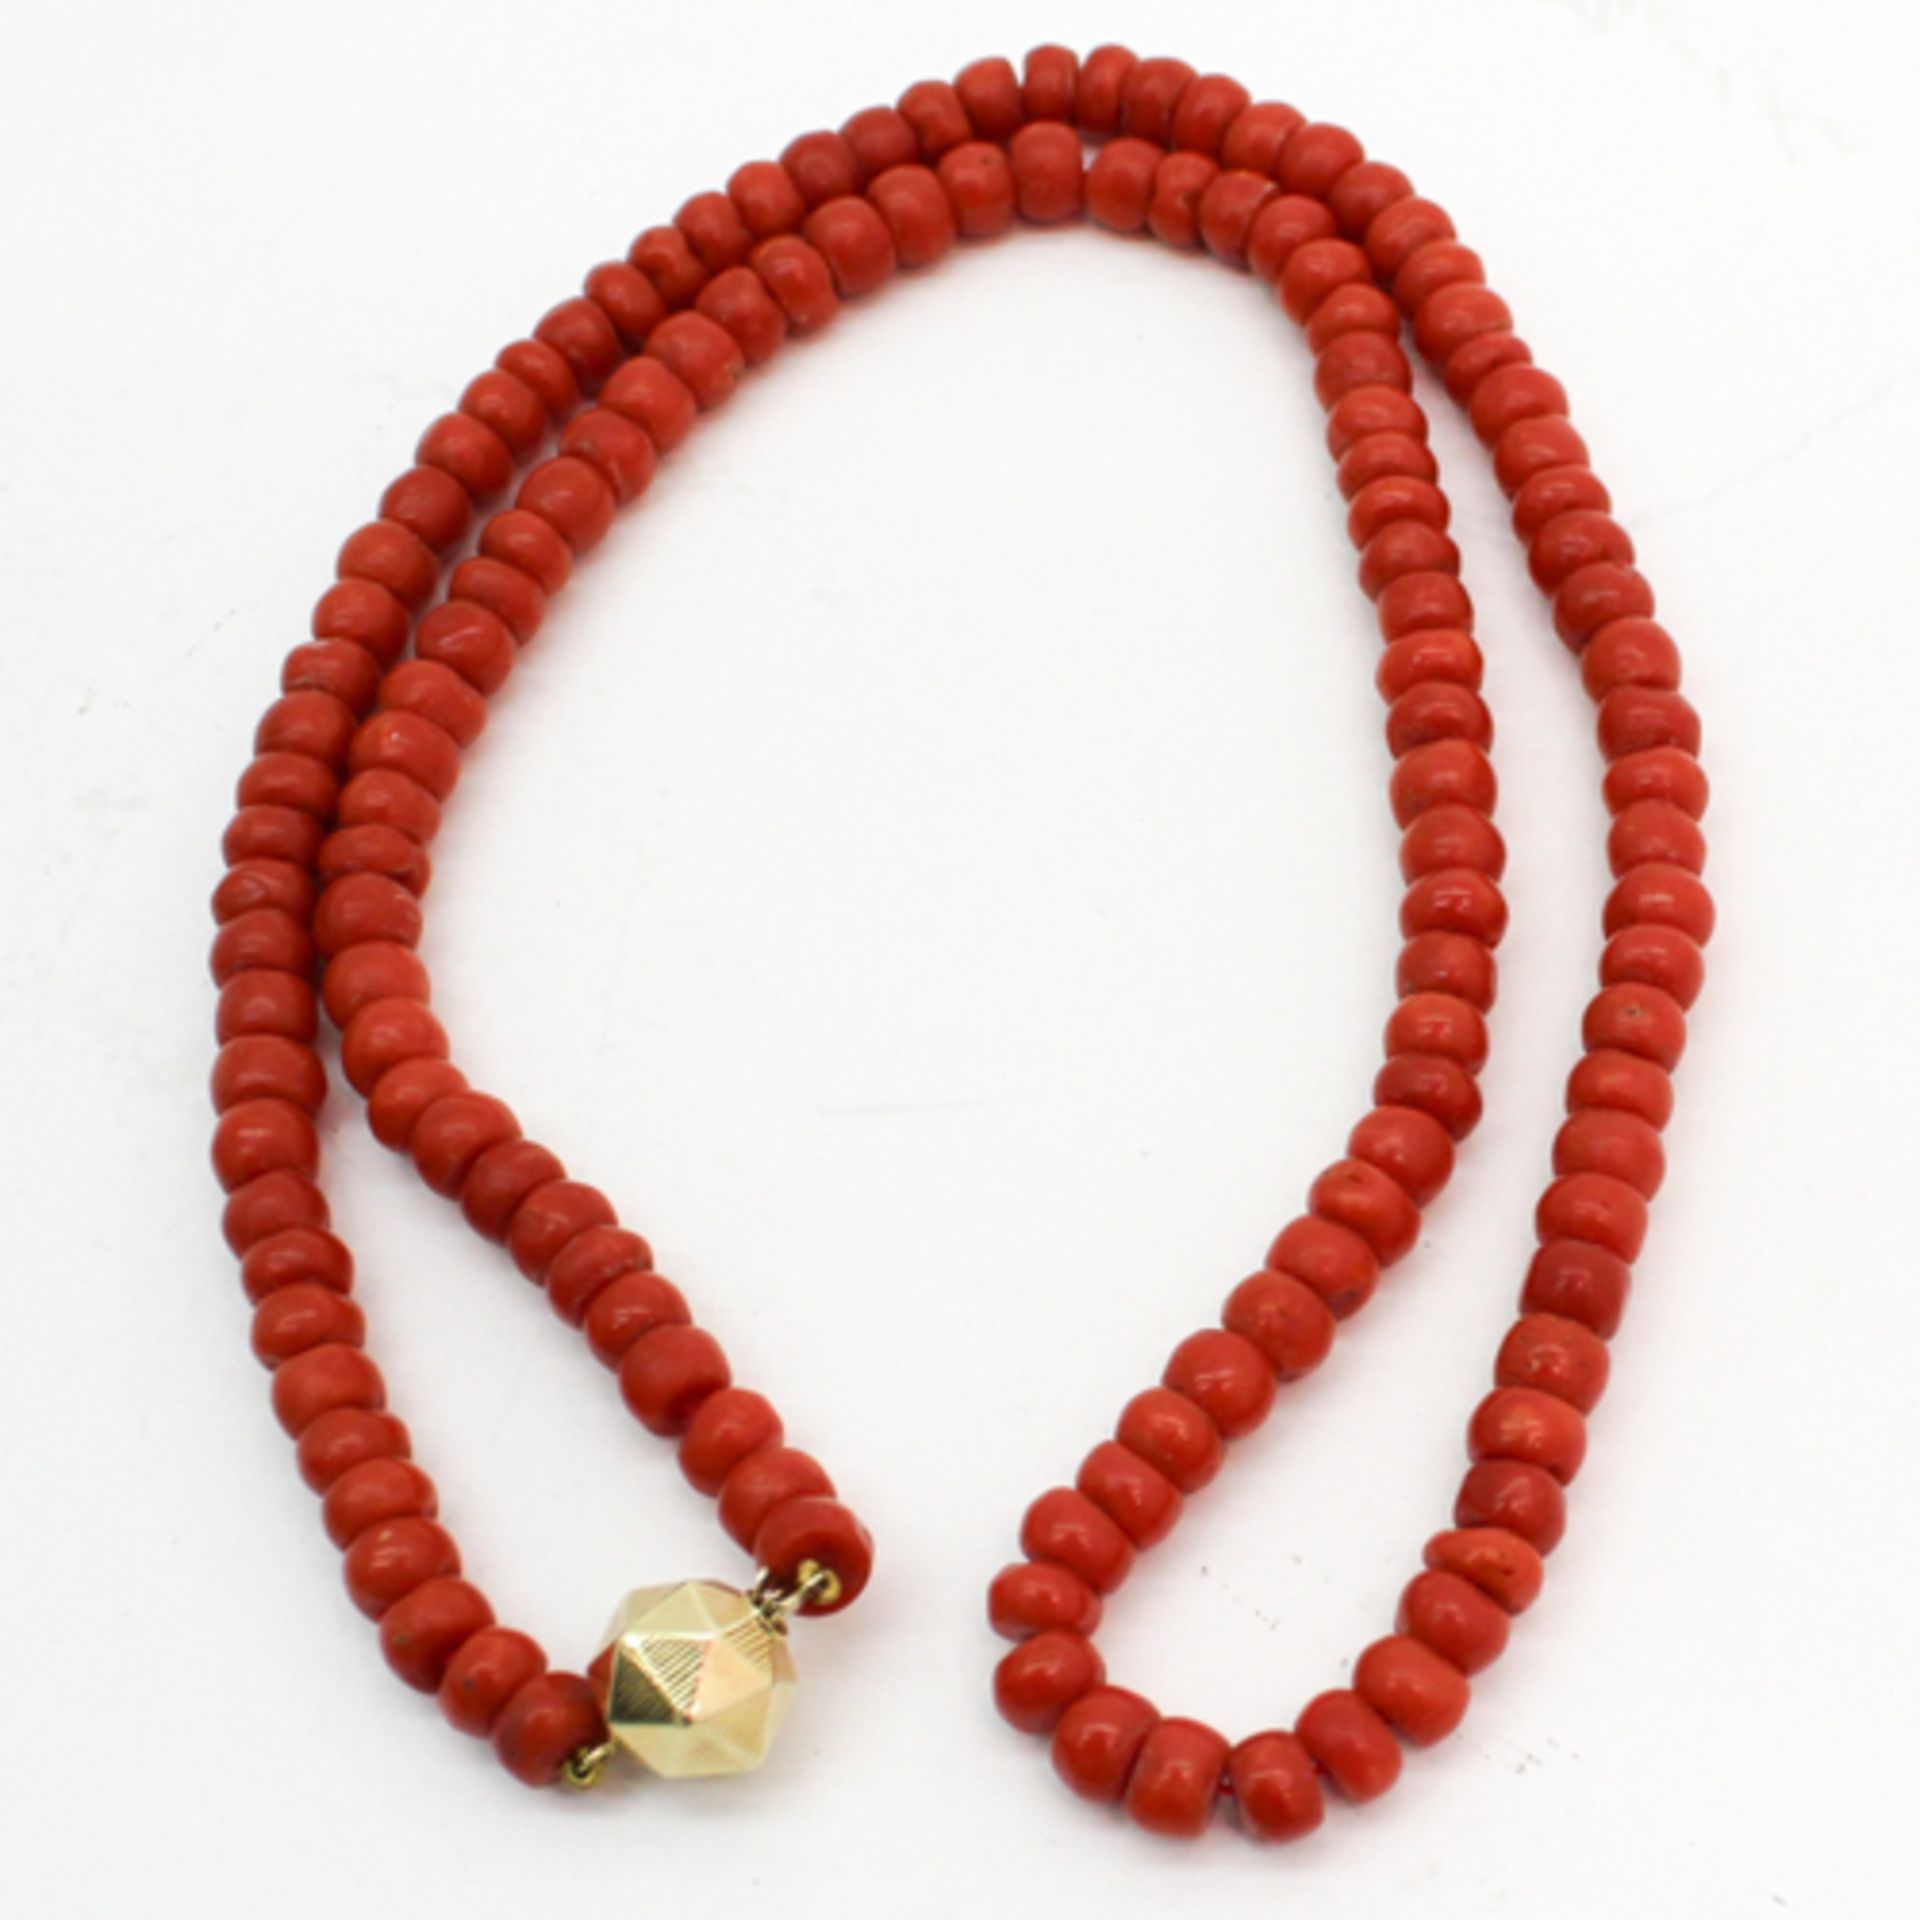 RED CORAL NECKLACE ON 14KG CLASP Coral is 8 mm diameter, 58 gram.